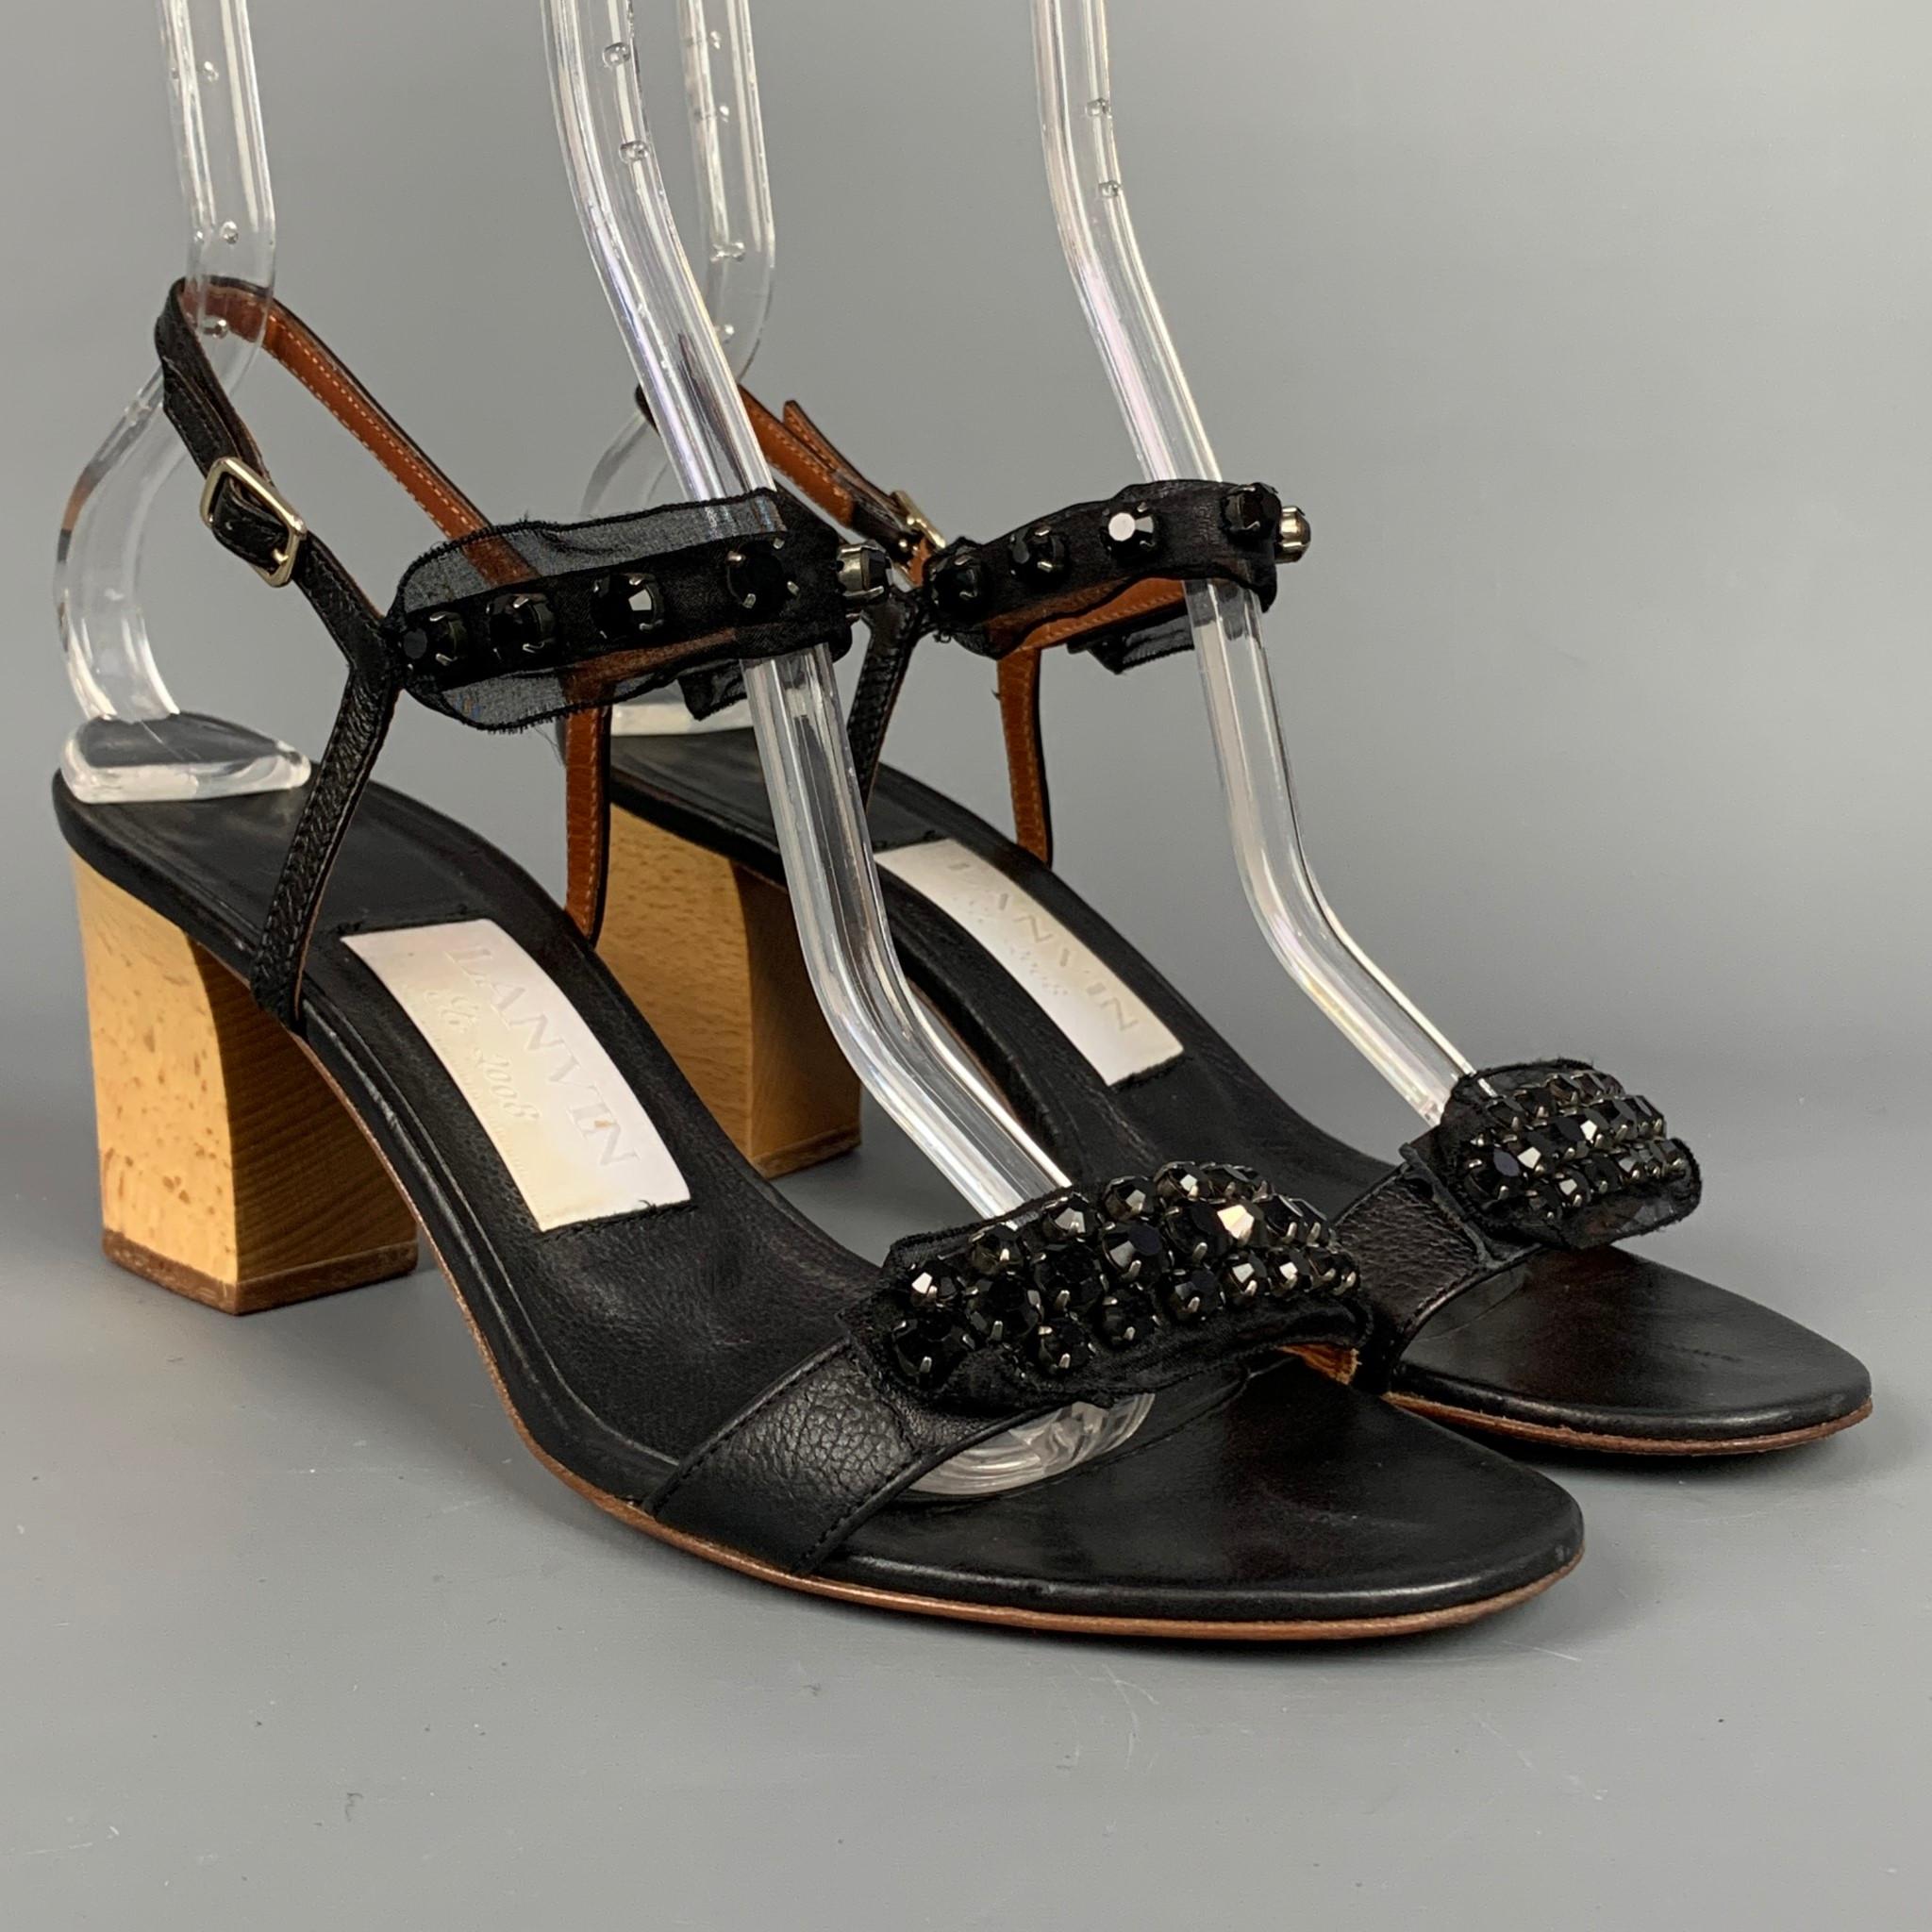 LANVIN sandals comes in a black leather with a silk ribbon featuring rhinestone details, ankle strap, and a stacked heel. Made in Italy.

Very Good Pre-Owned Condition.
Marked: IT 39

Measurements:

Heel: 3 in.